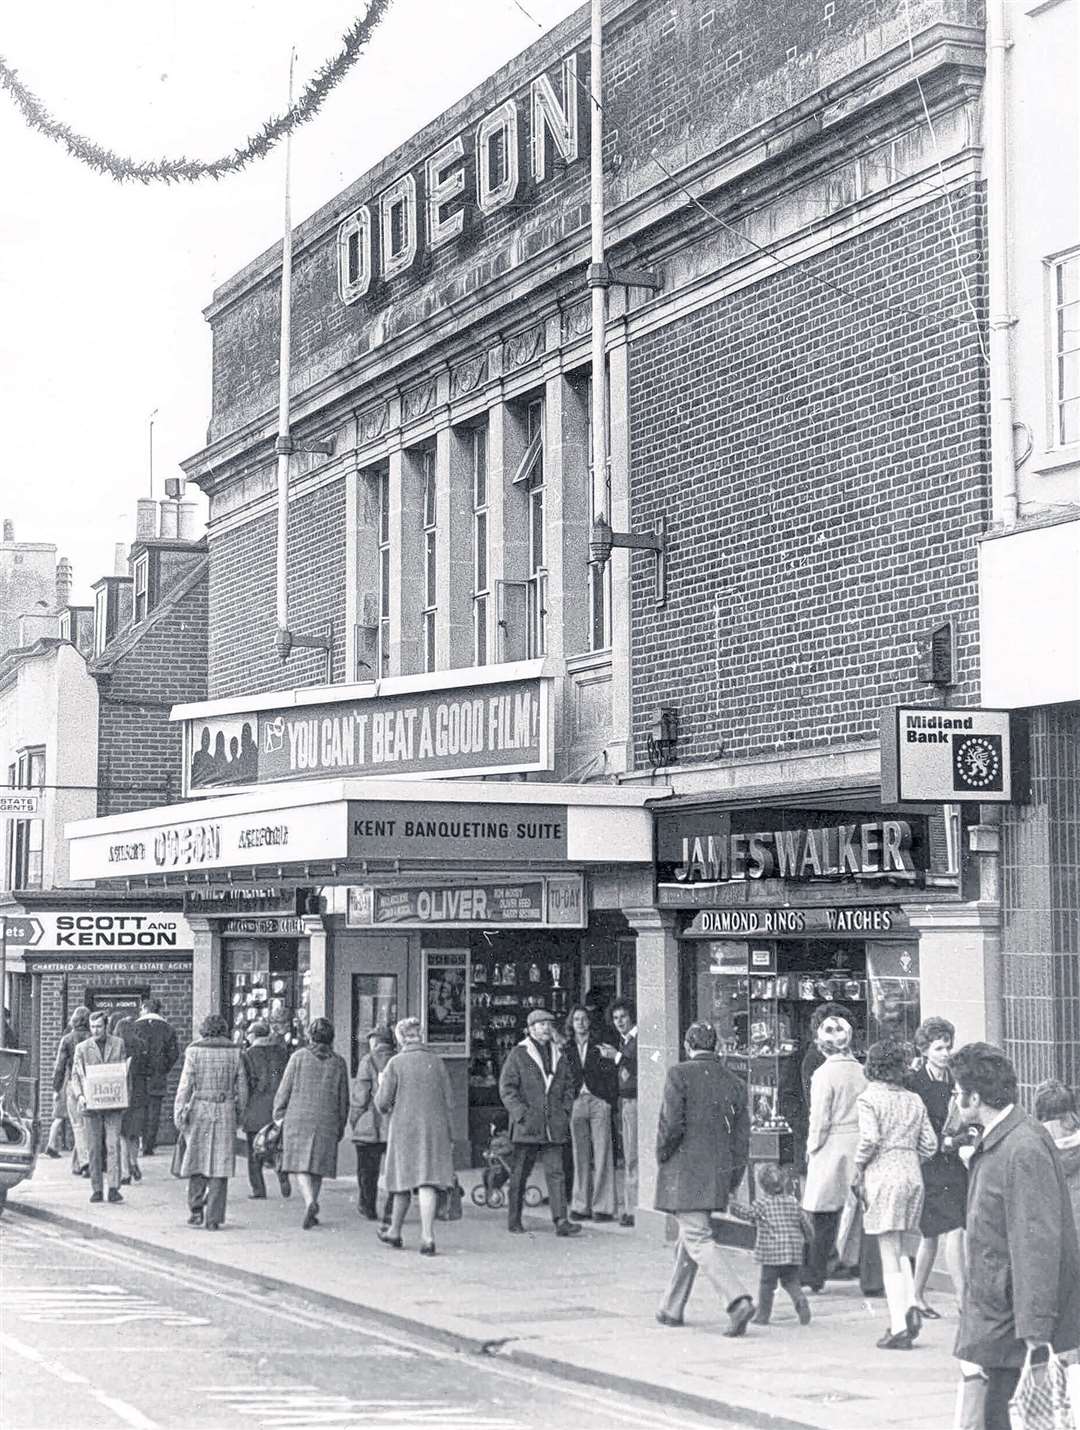 Before becoming a bingo hall, this undated photo shows the landmark Odeon building